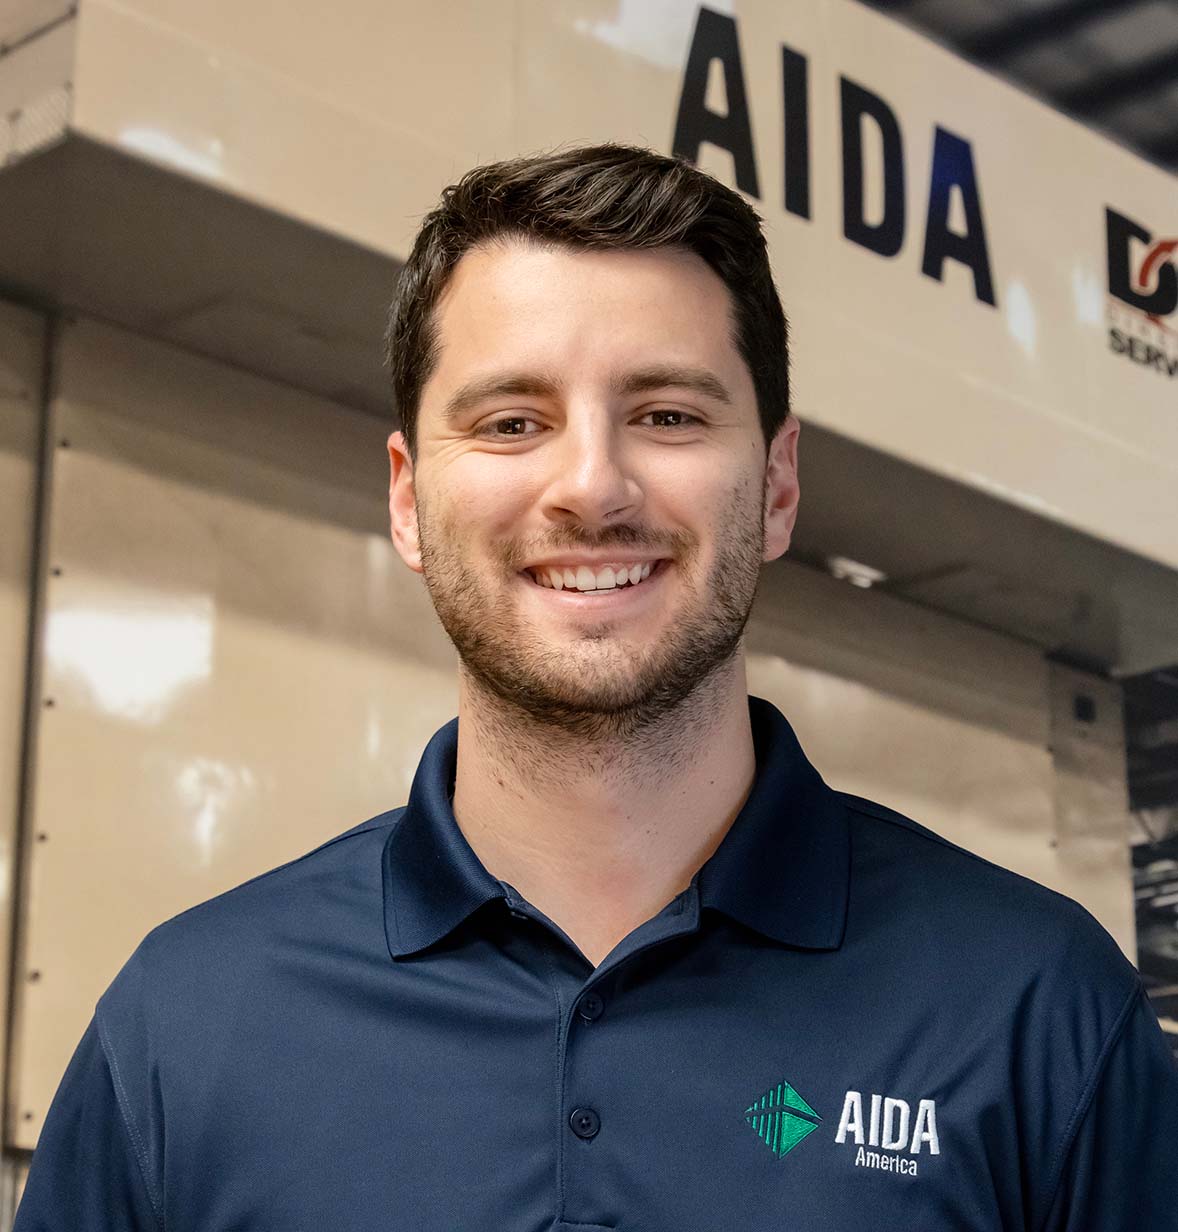 AIDA-America Regional Sales Manager Promotions